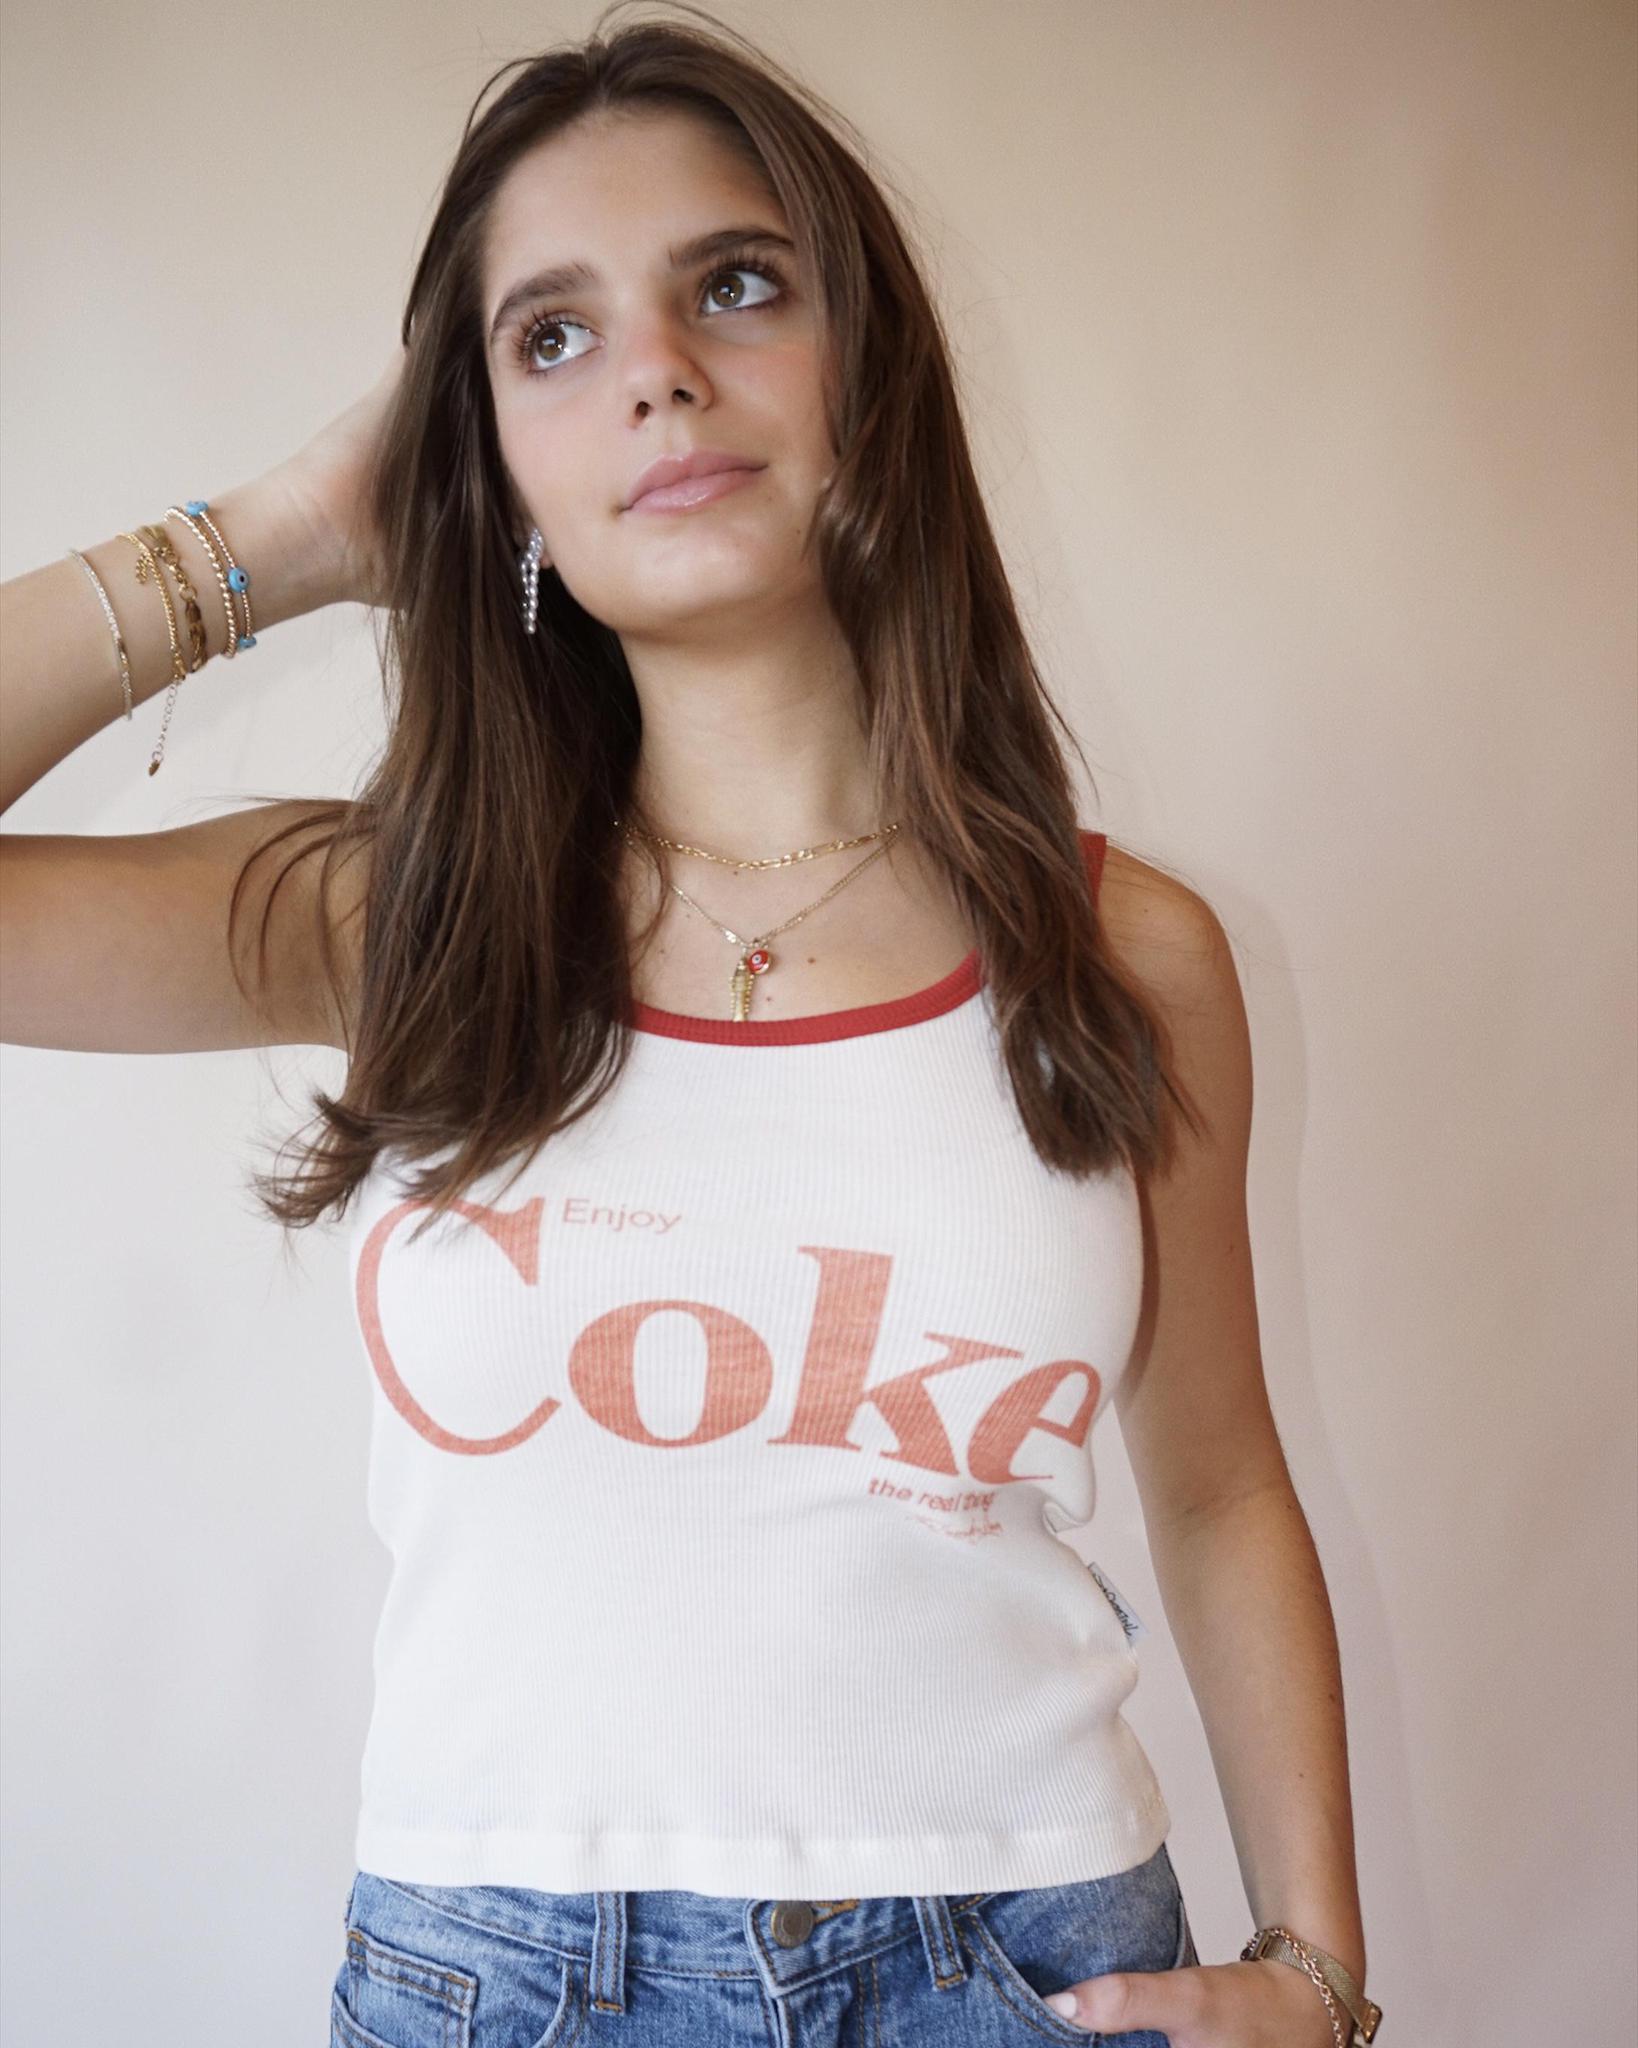 The Laundry Room Coke Cropped Ribbed Tank Top